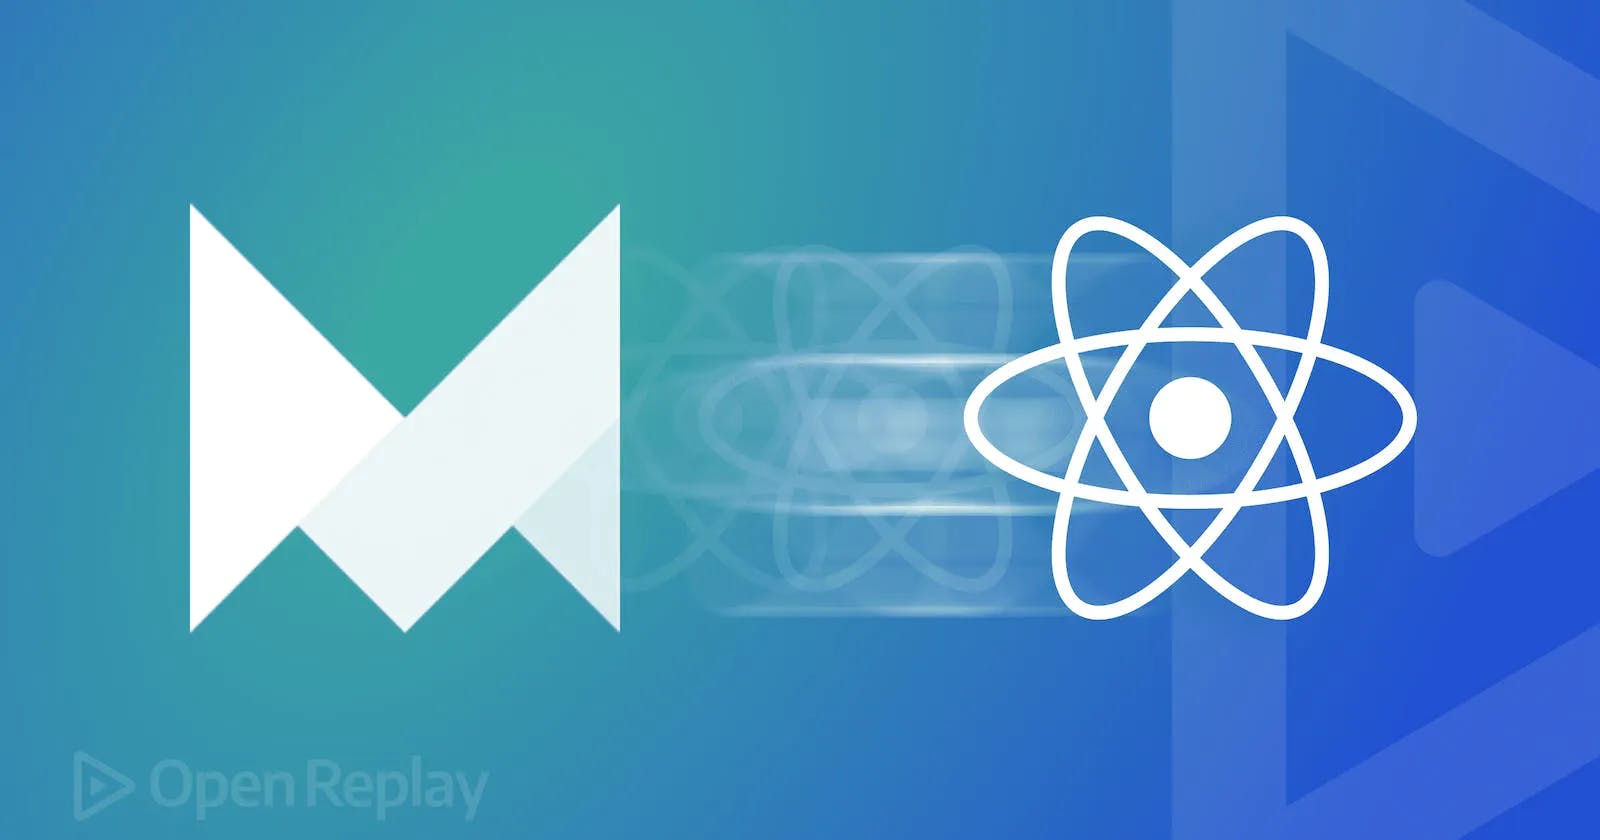 Doing animations in React with Framer Motion